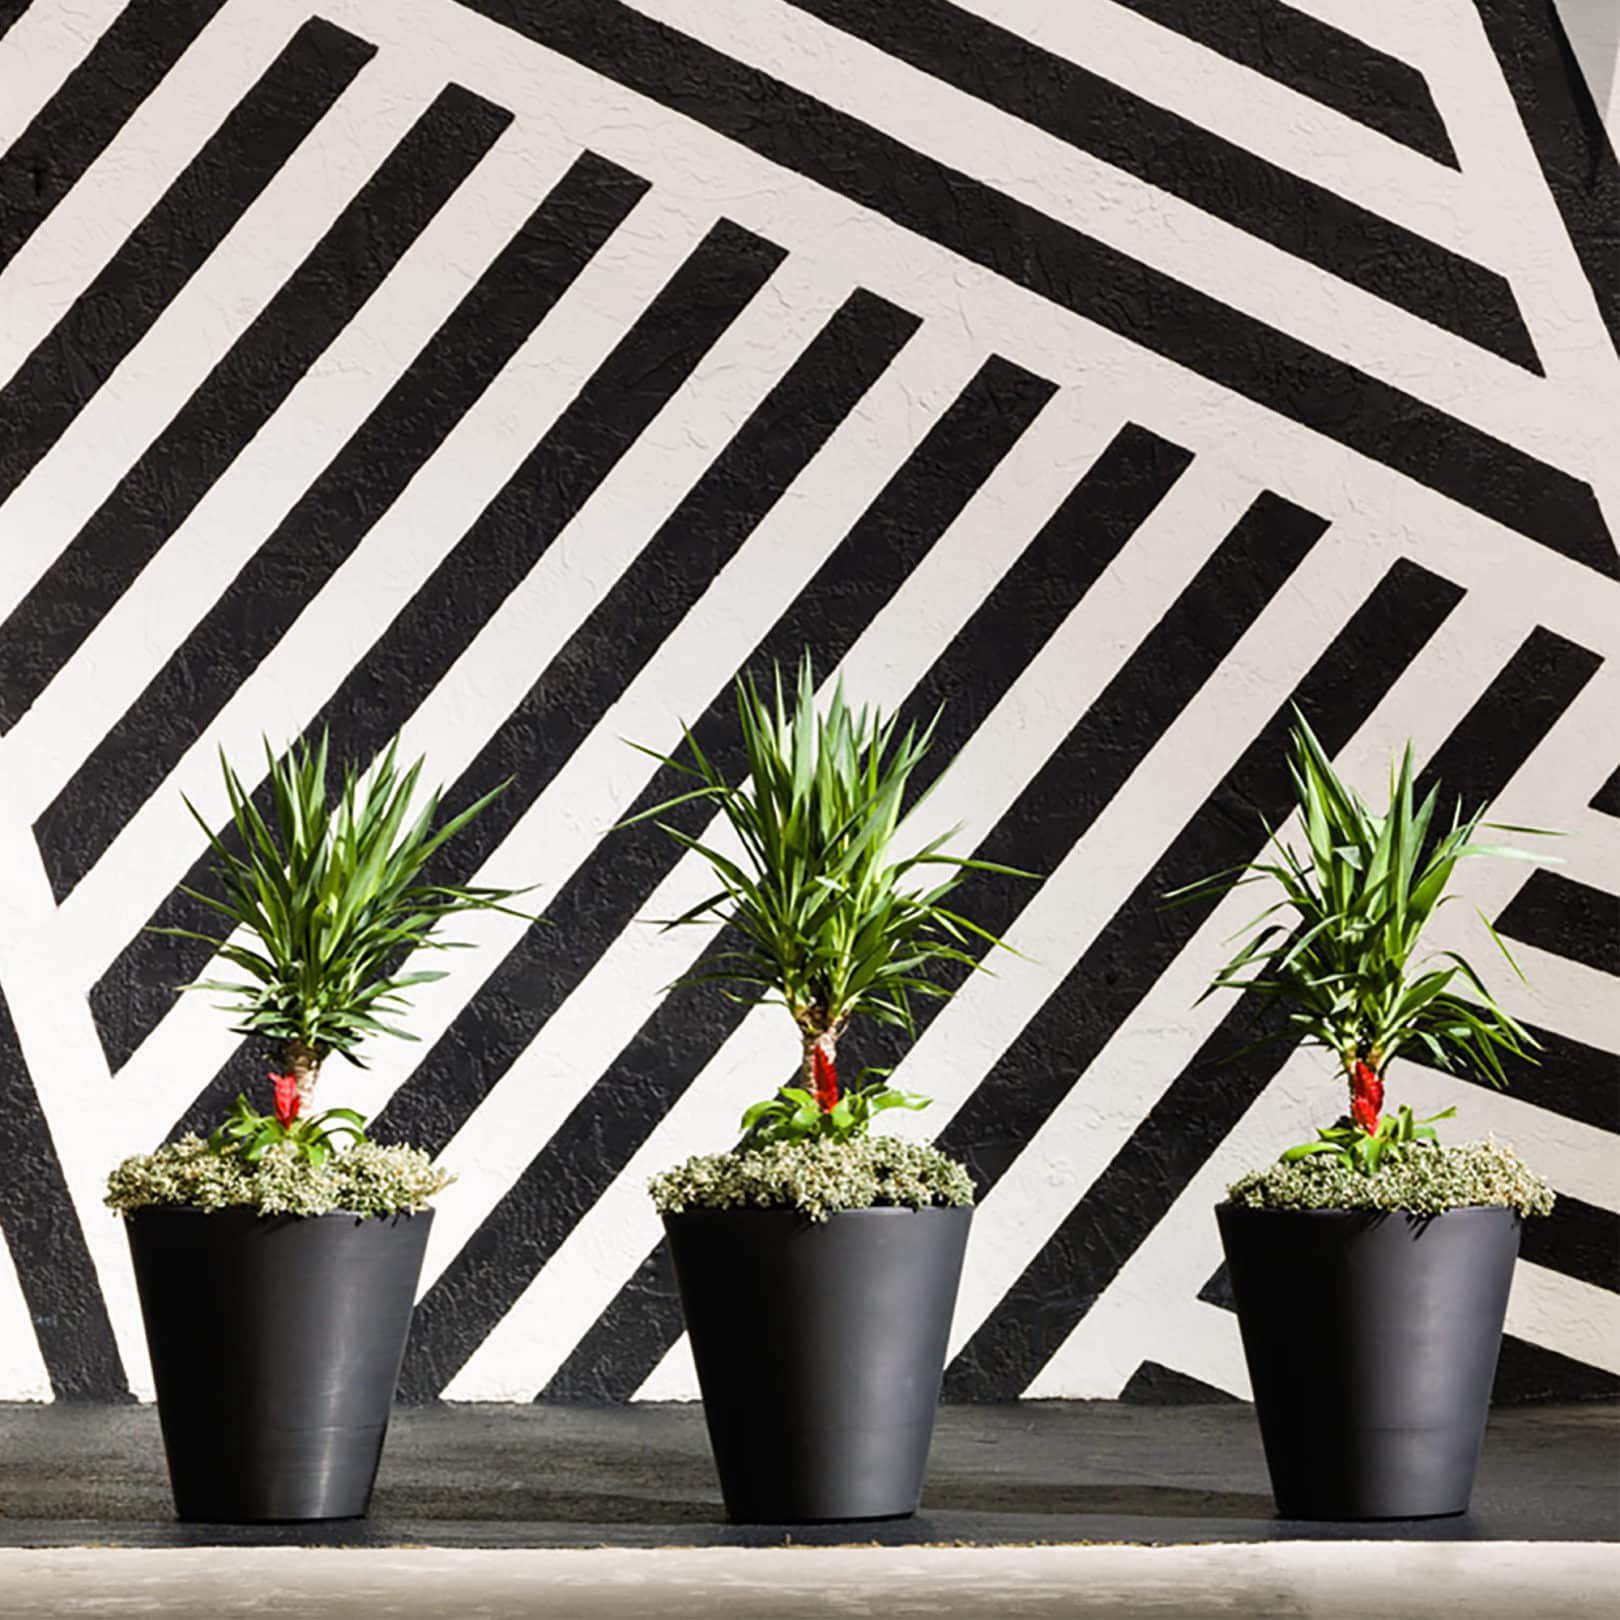 Striped Black and White Wall with Madison Planters